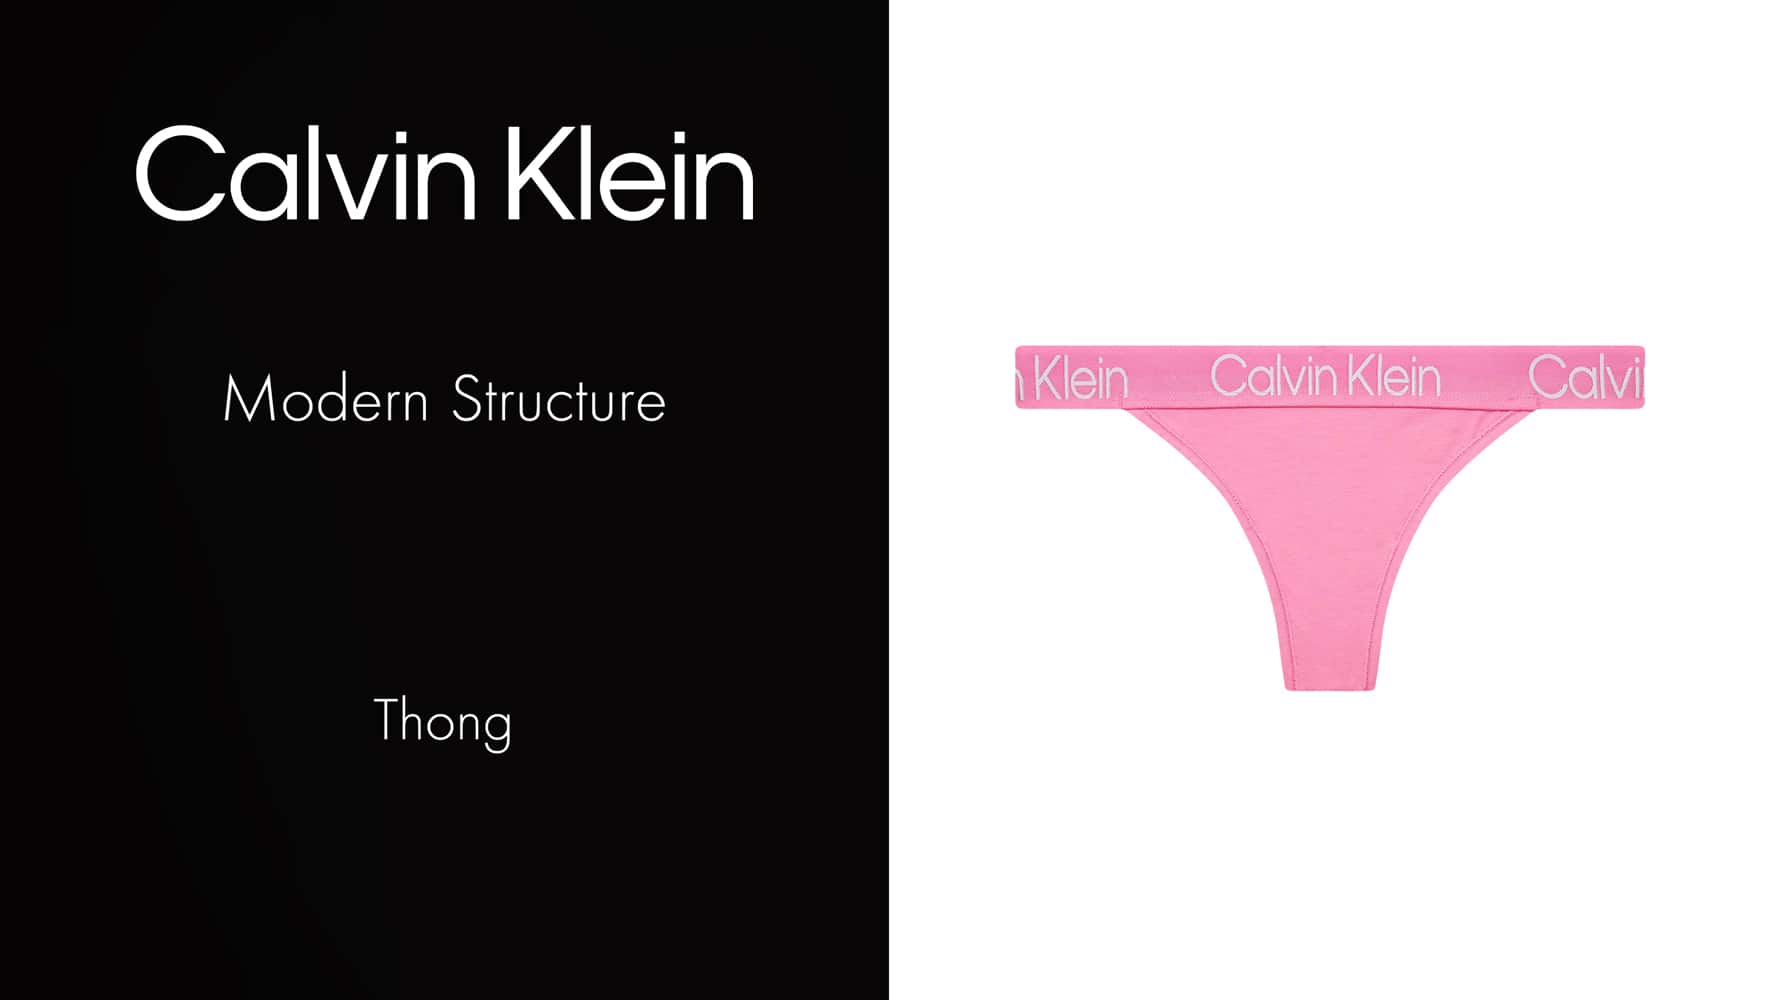 Thong - Modern Structure